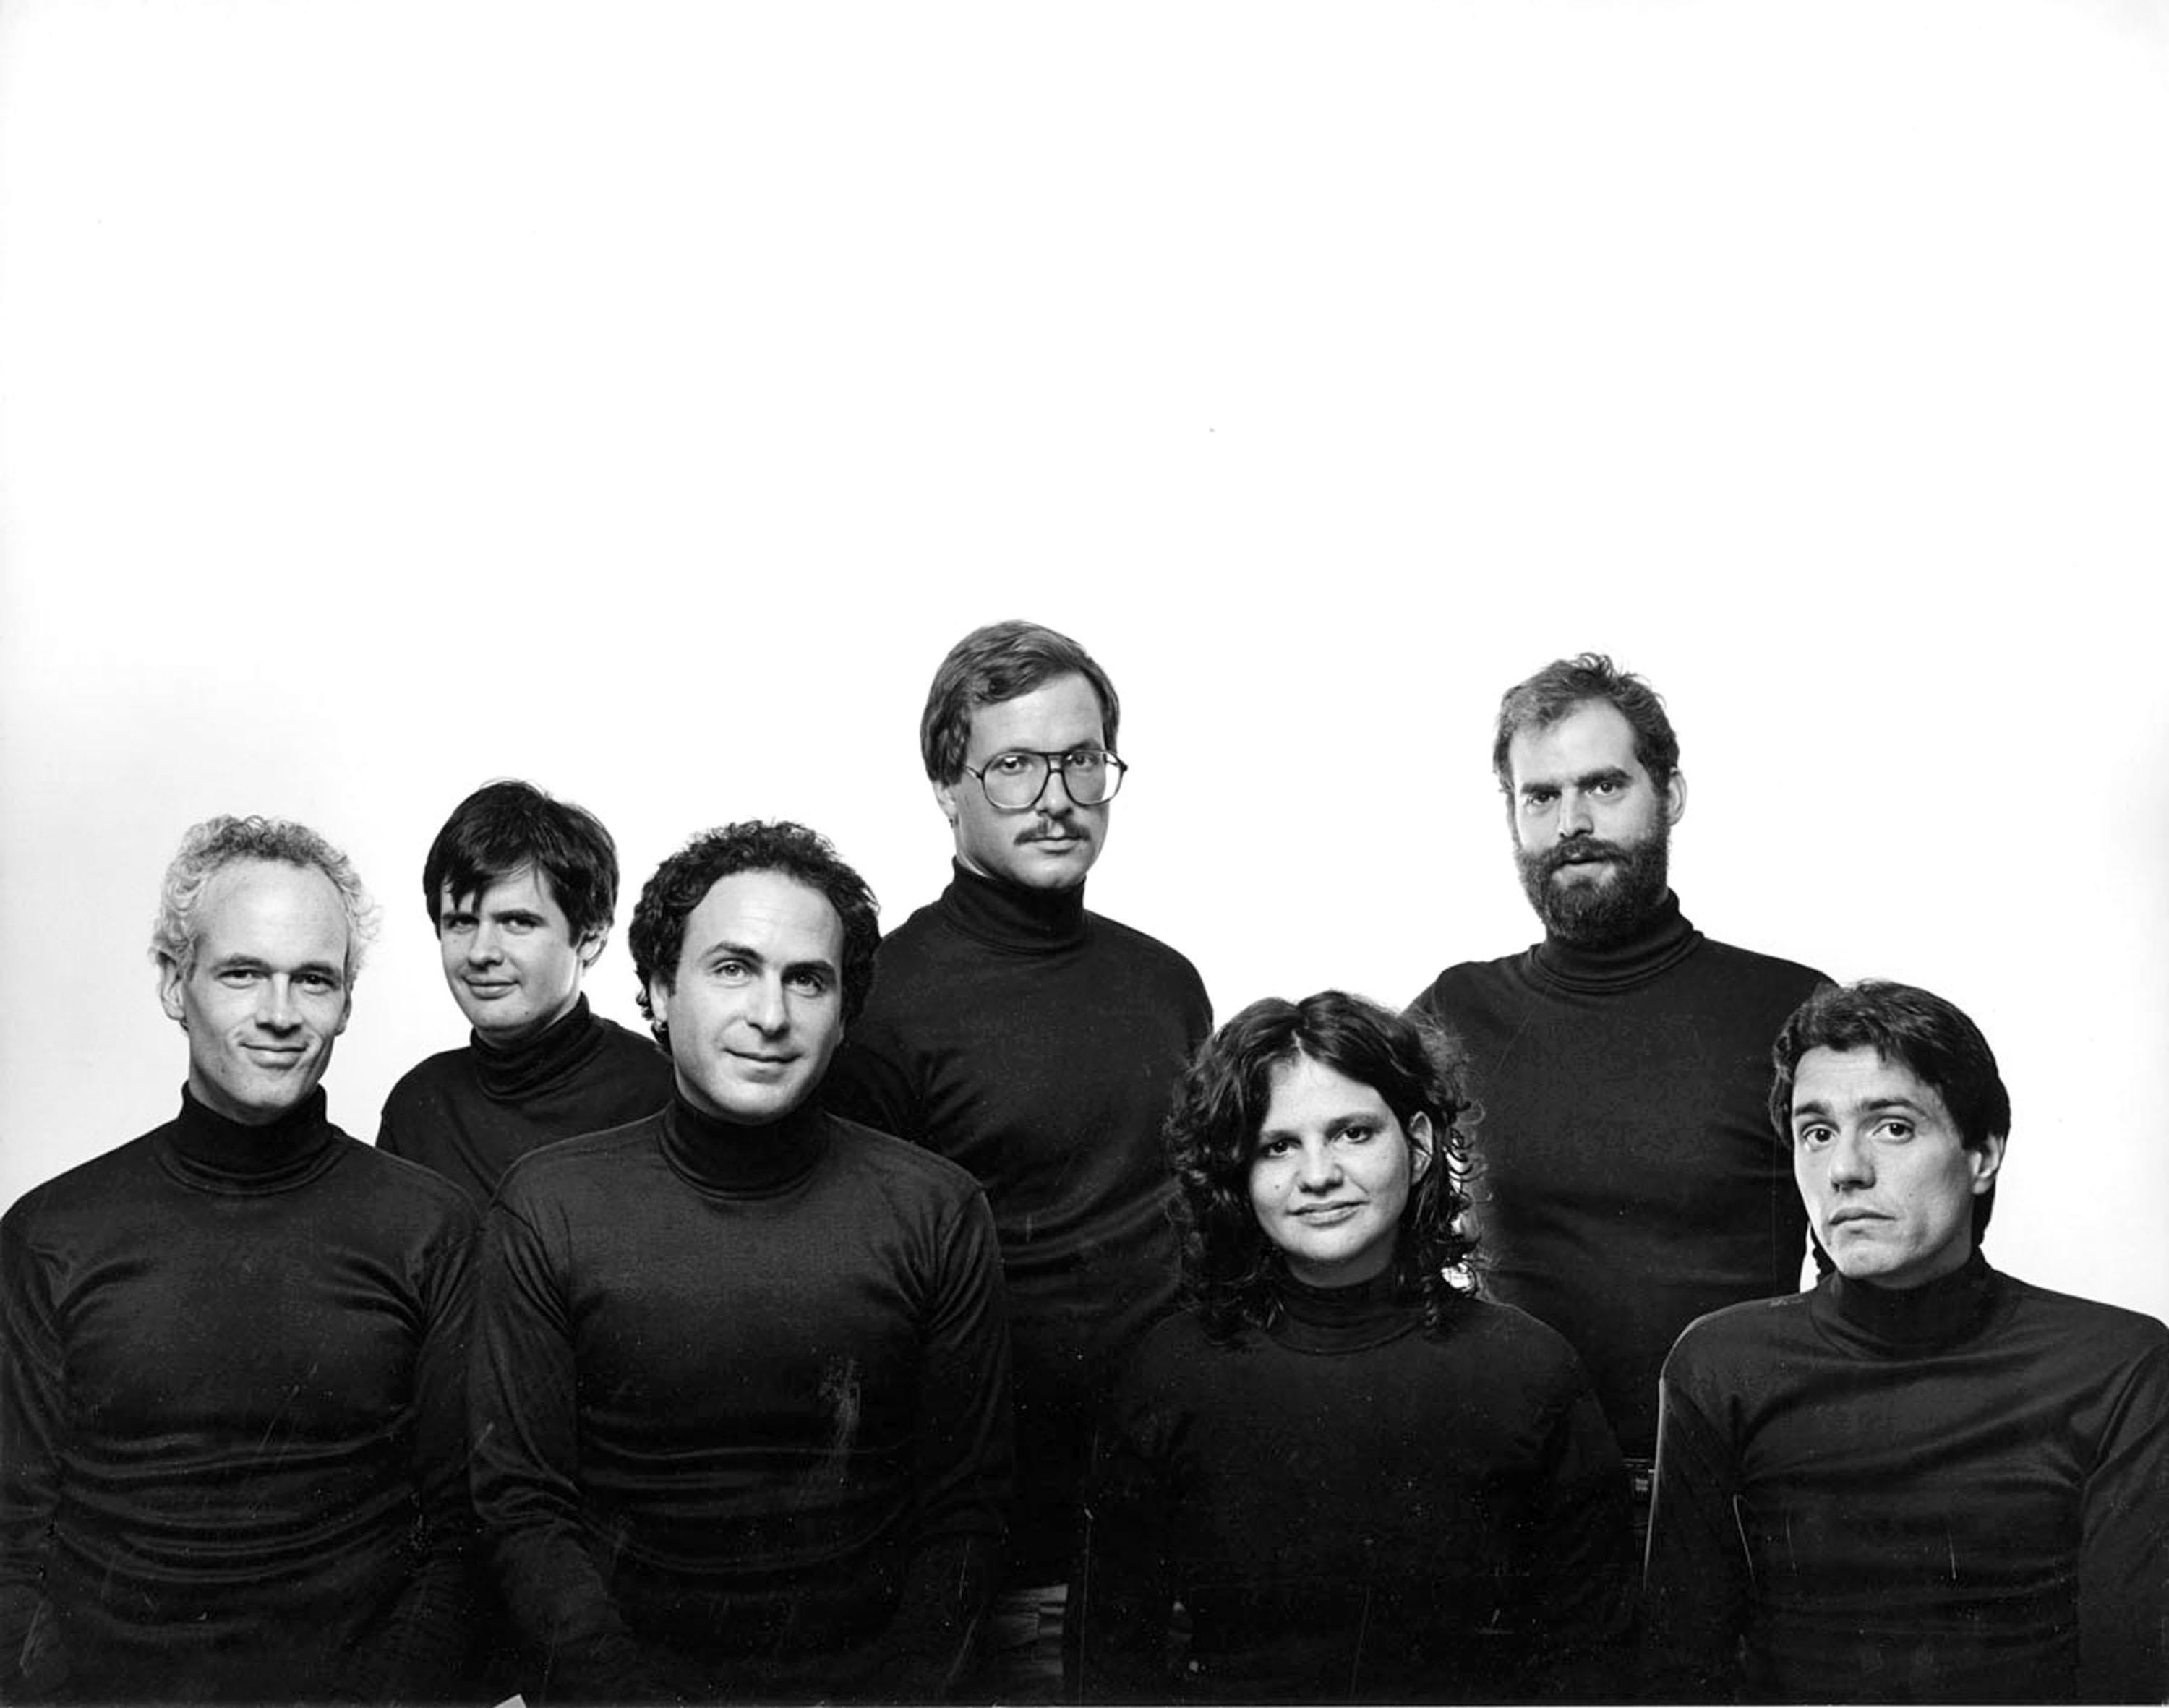 Jack Mitchell Black and White Photograph -  Playwrights Reynolds, Durang, Lapine, Tally, Wasserstein, Finn, and Inaurato